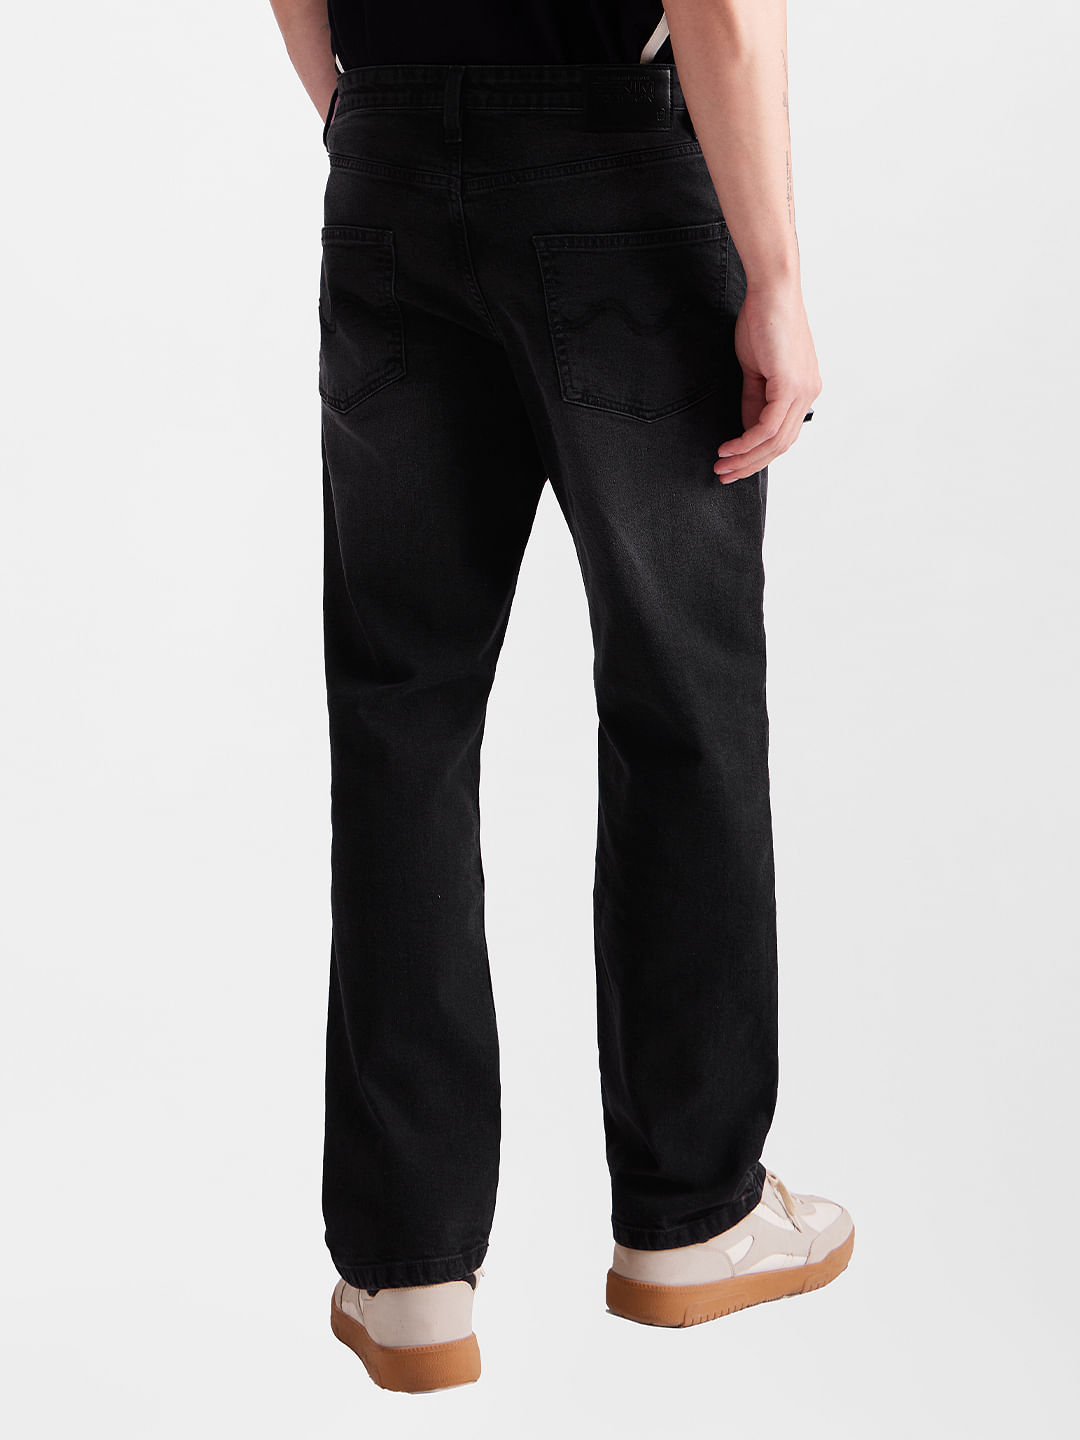 Buy Solids: Black (Straight Fit) Men Straight Fit Jeans Online